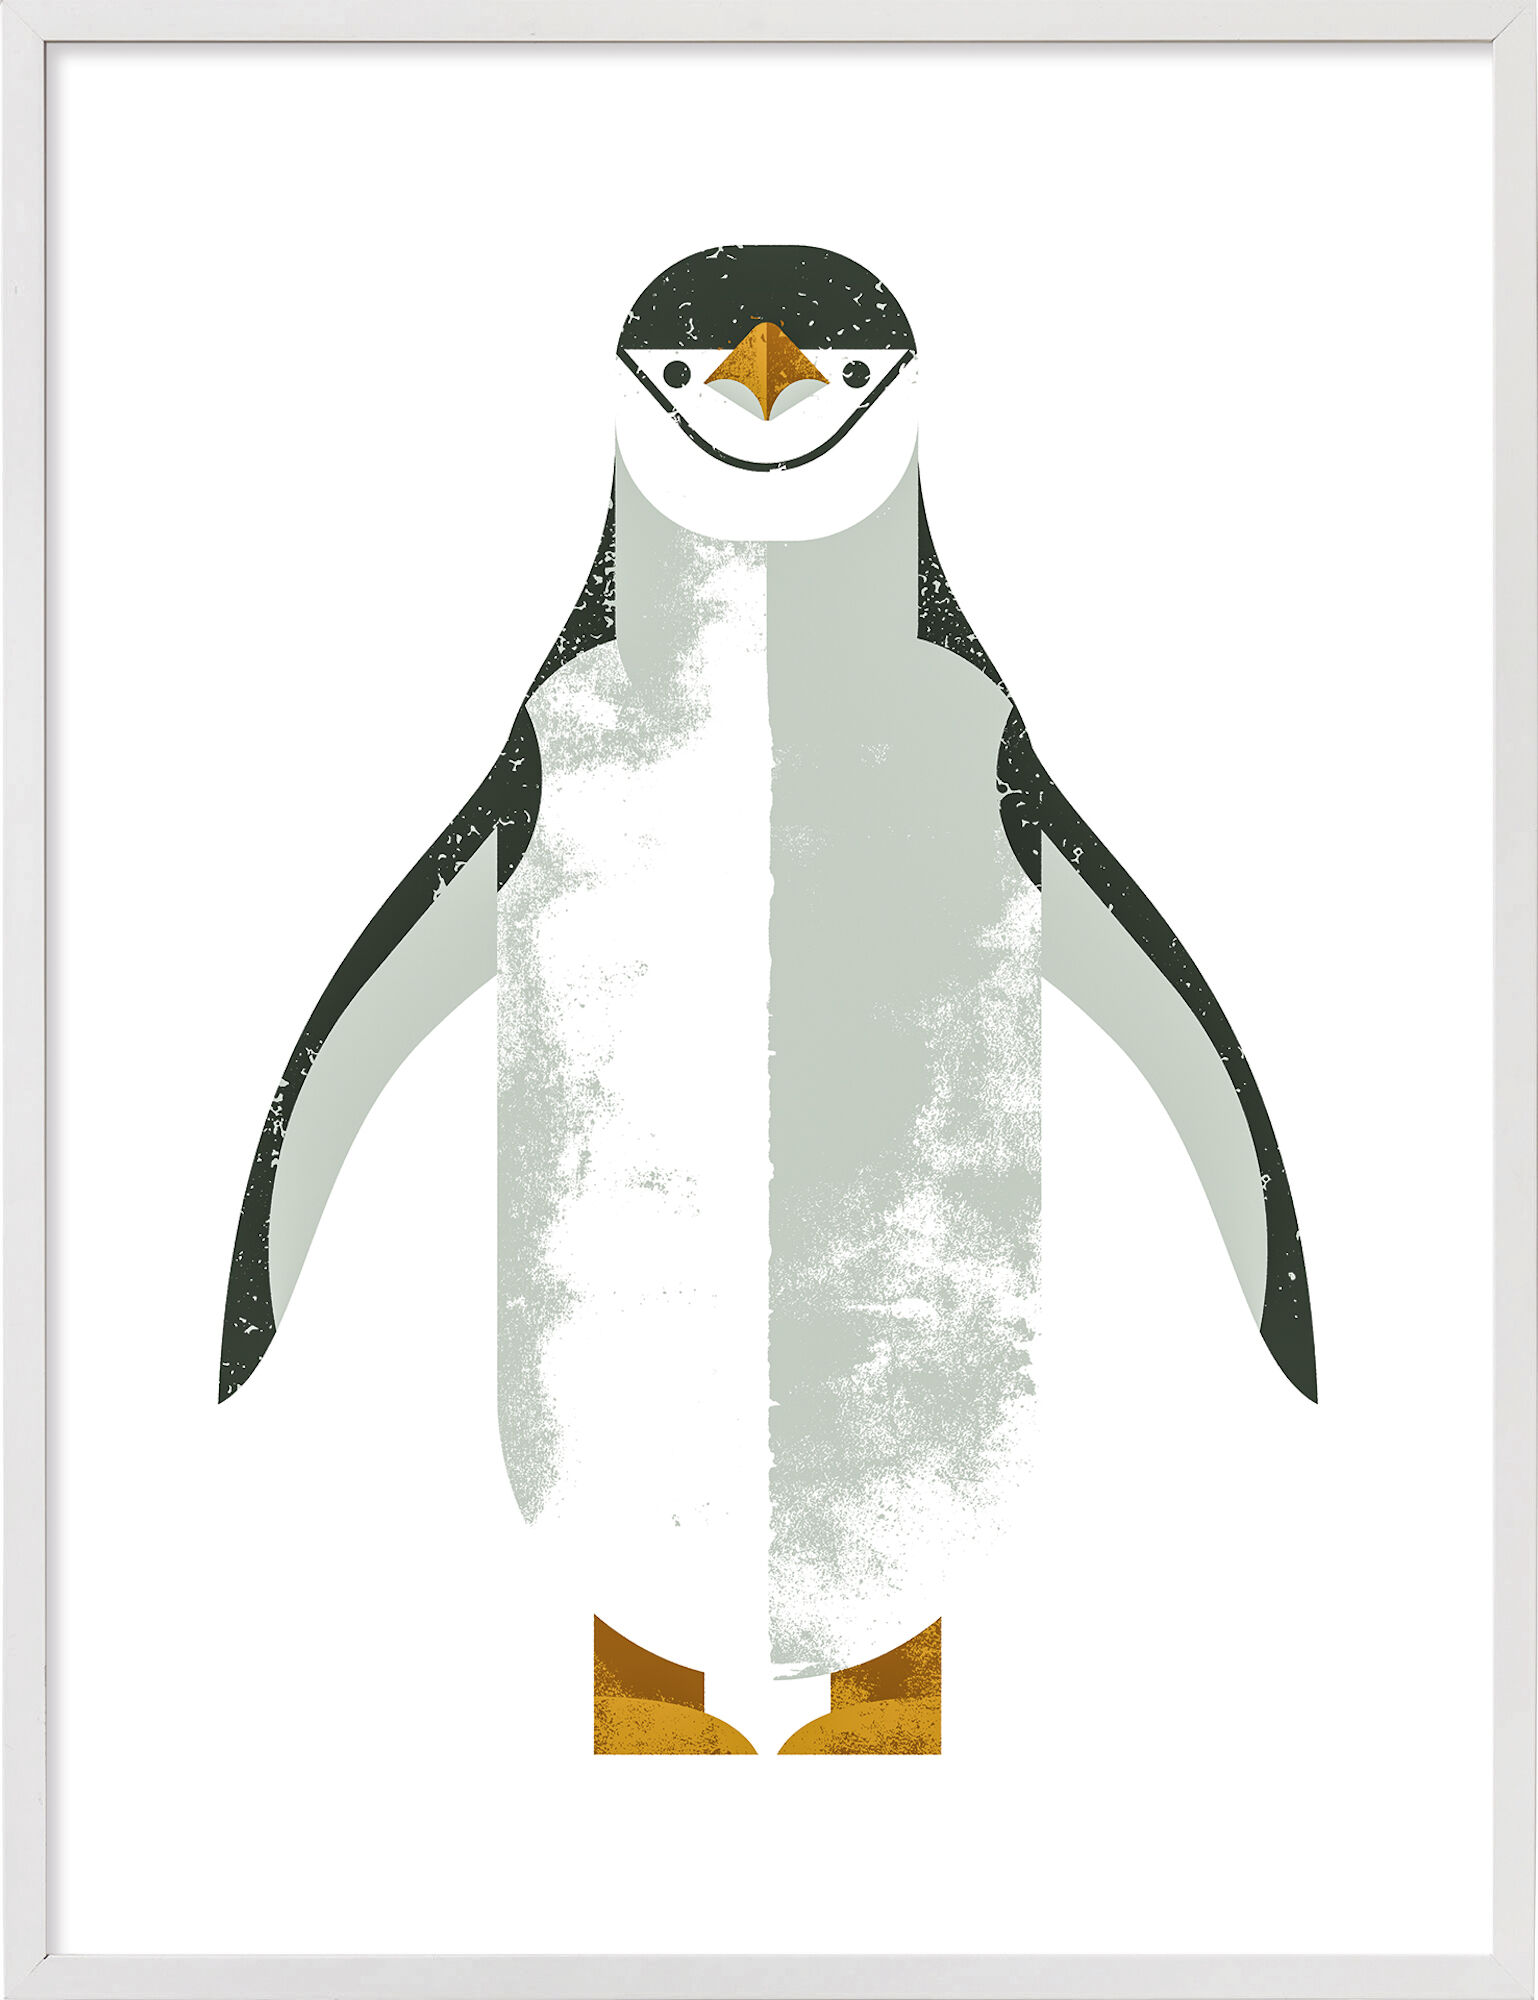 Picture "Penguin" (2016) by Dieter Braun